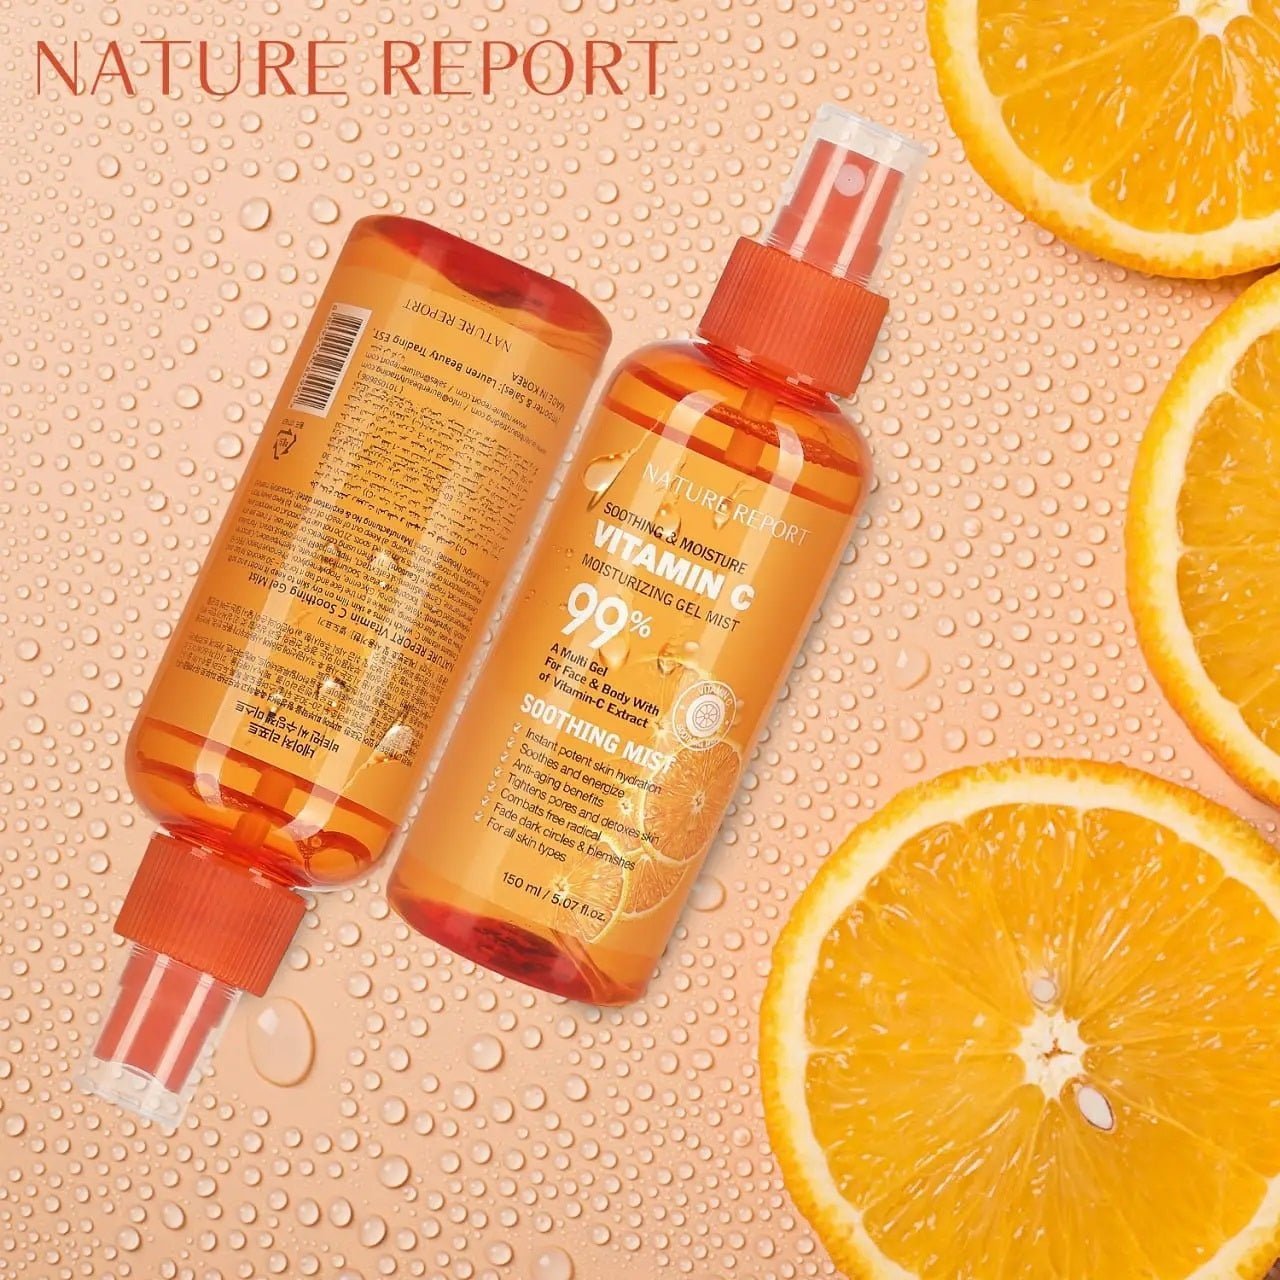 Nature Report Vitamin C Soothing Mist 99% 150Ml - IZZAT DAOUK SA